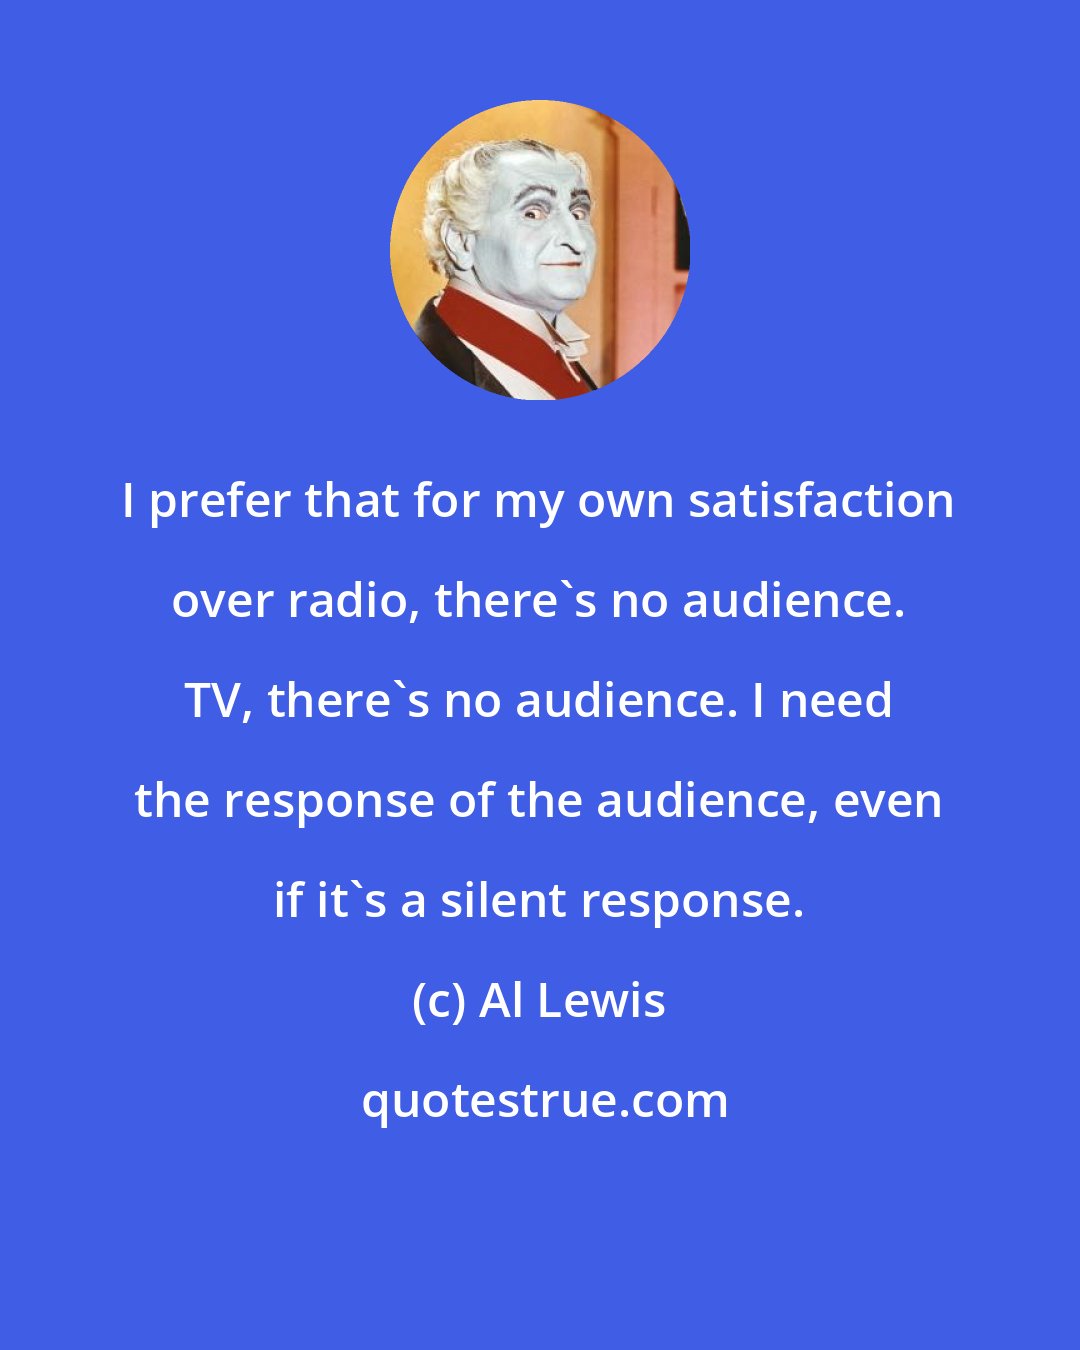 Al Lewis: I prefer that for my own satisfaction over radio, there's no audience. TV, there's no audience. I need the response of the audience, even if it's a silent response.